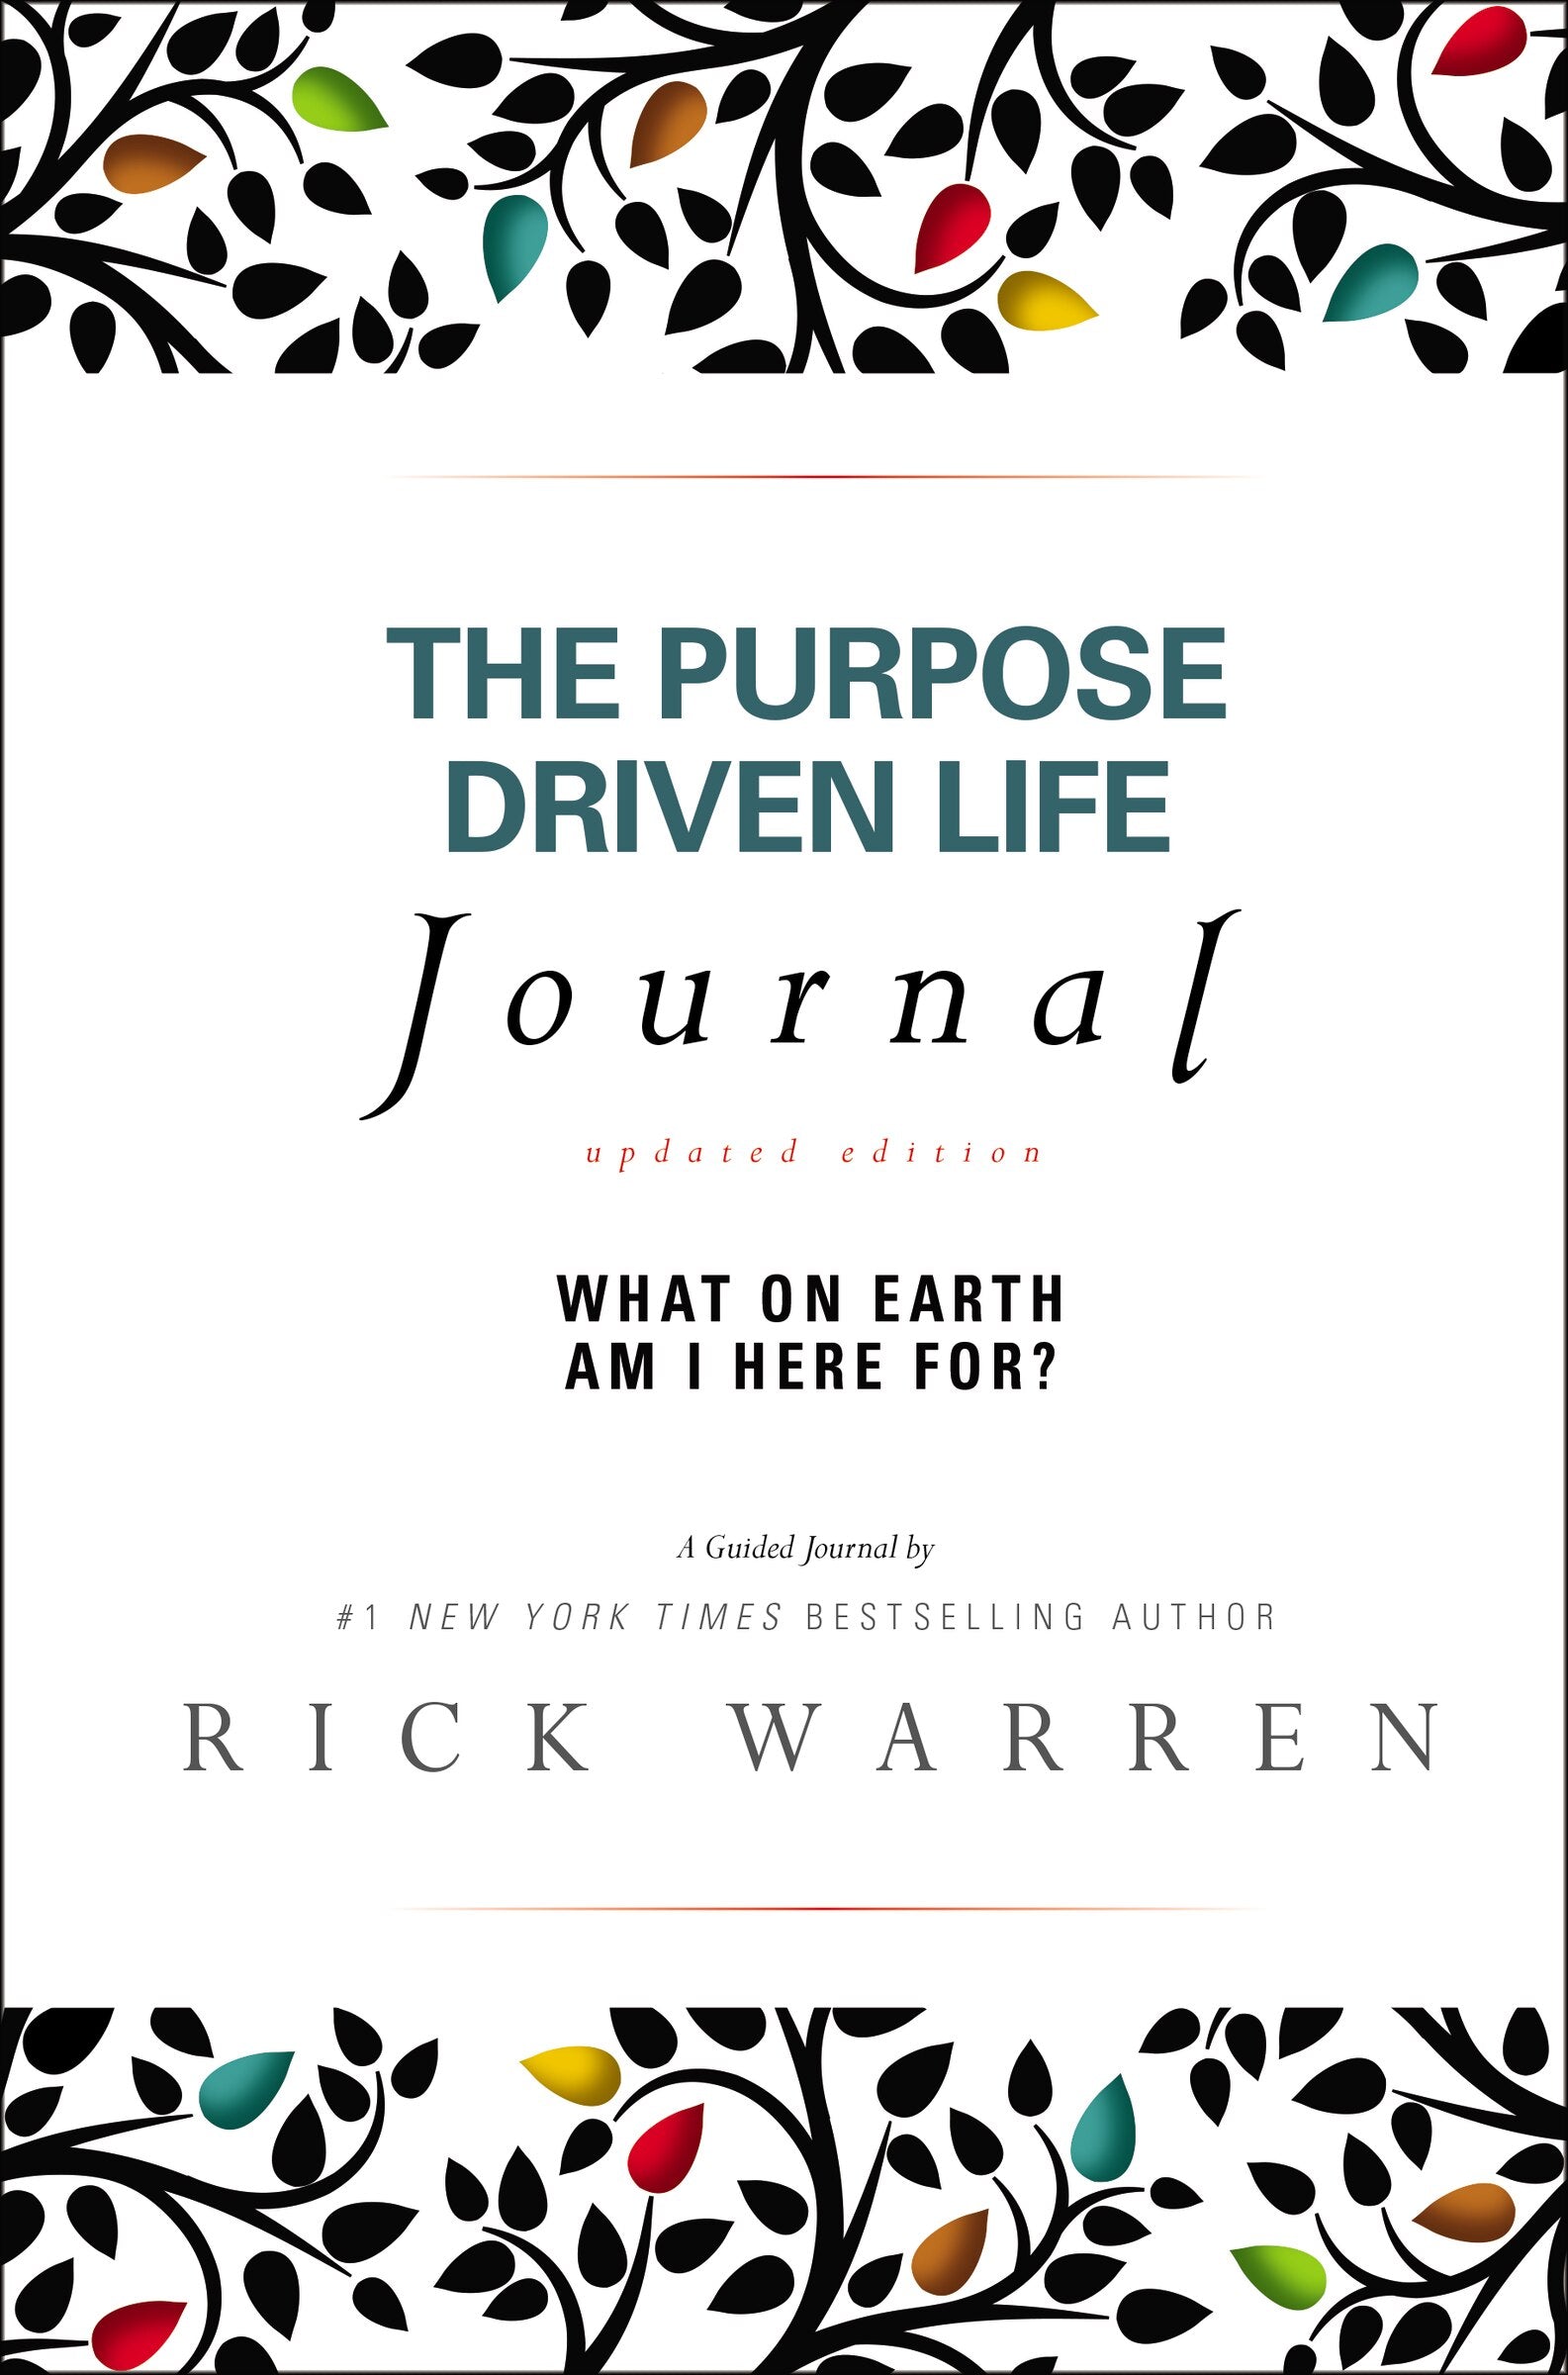 The Purpose Driven Life Journal: What on Earth Am I Here For? - Warren, Rick (Hardcover)-Religion - Inspirational/Spirituality-9780310337232-BookBizCanada